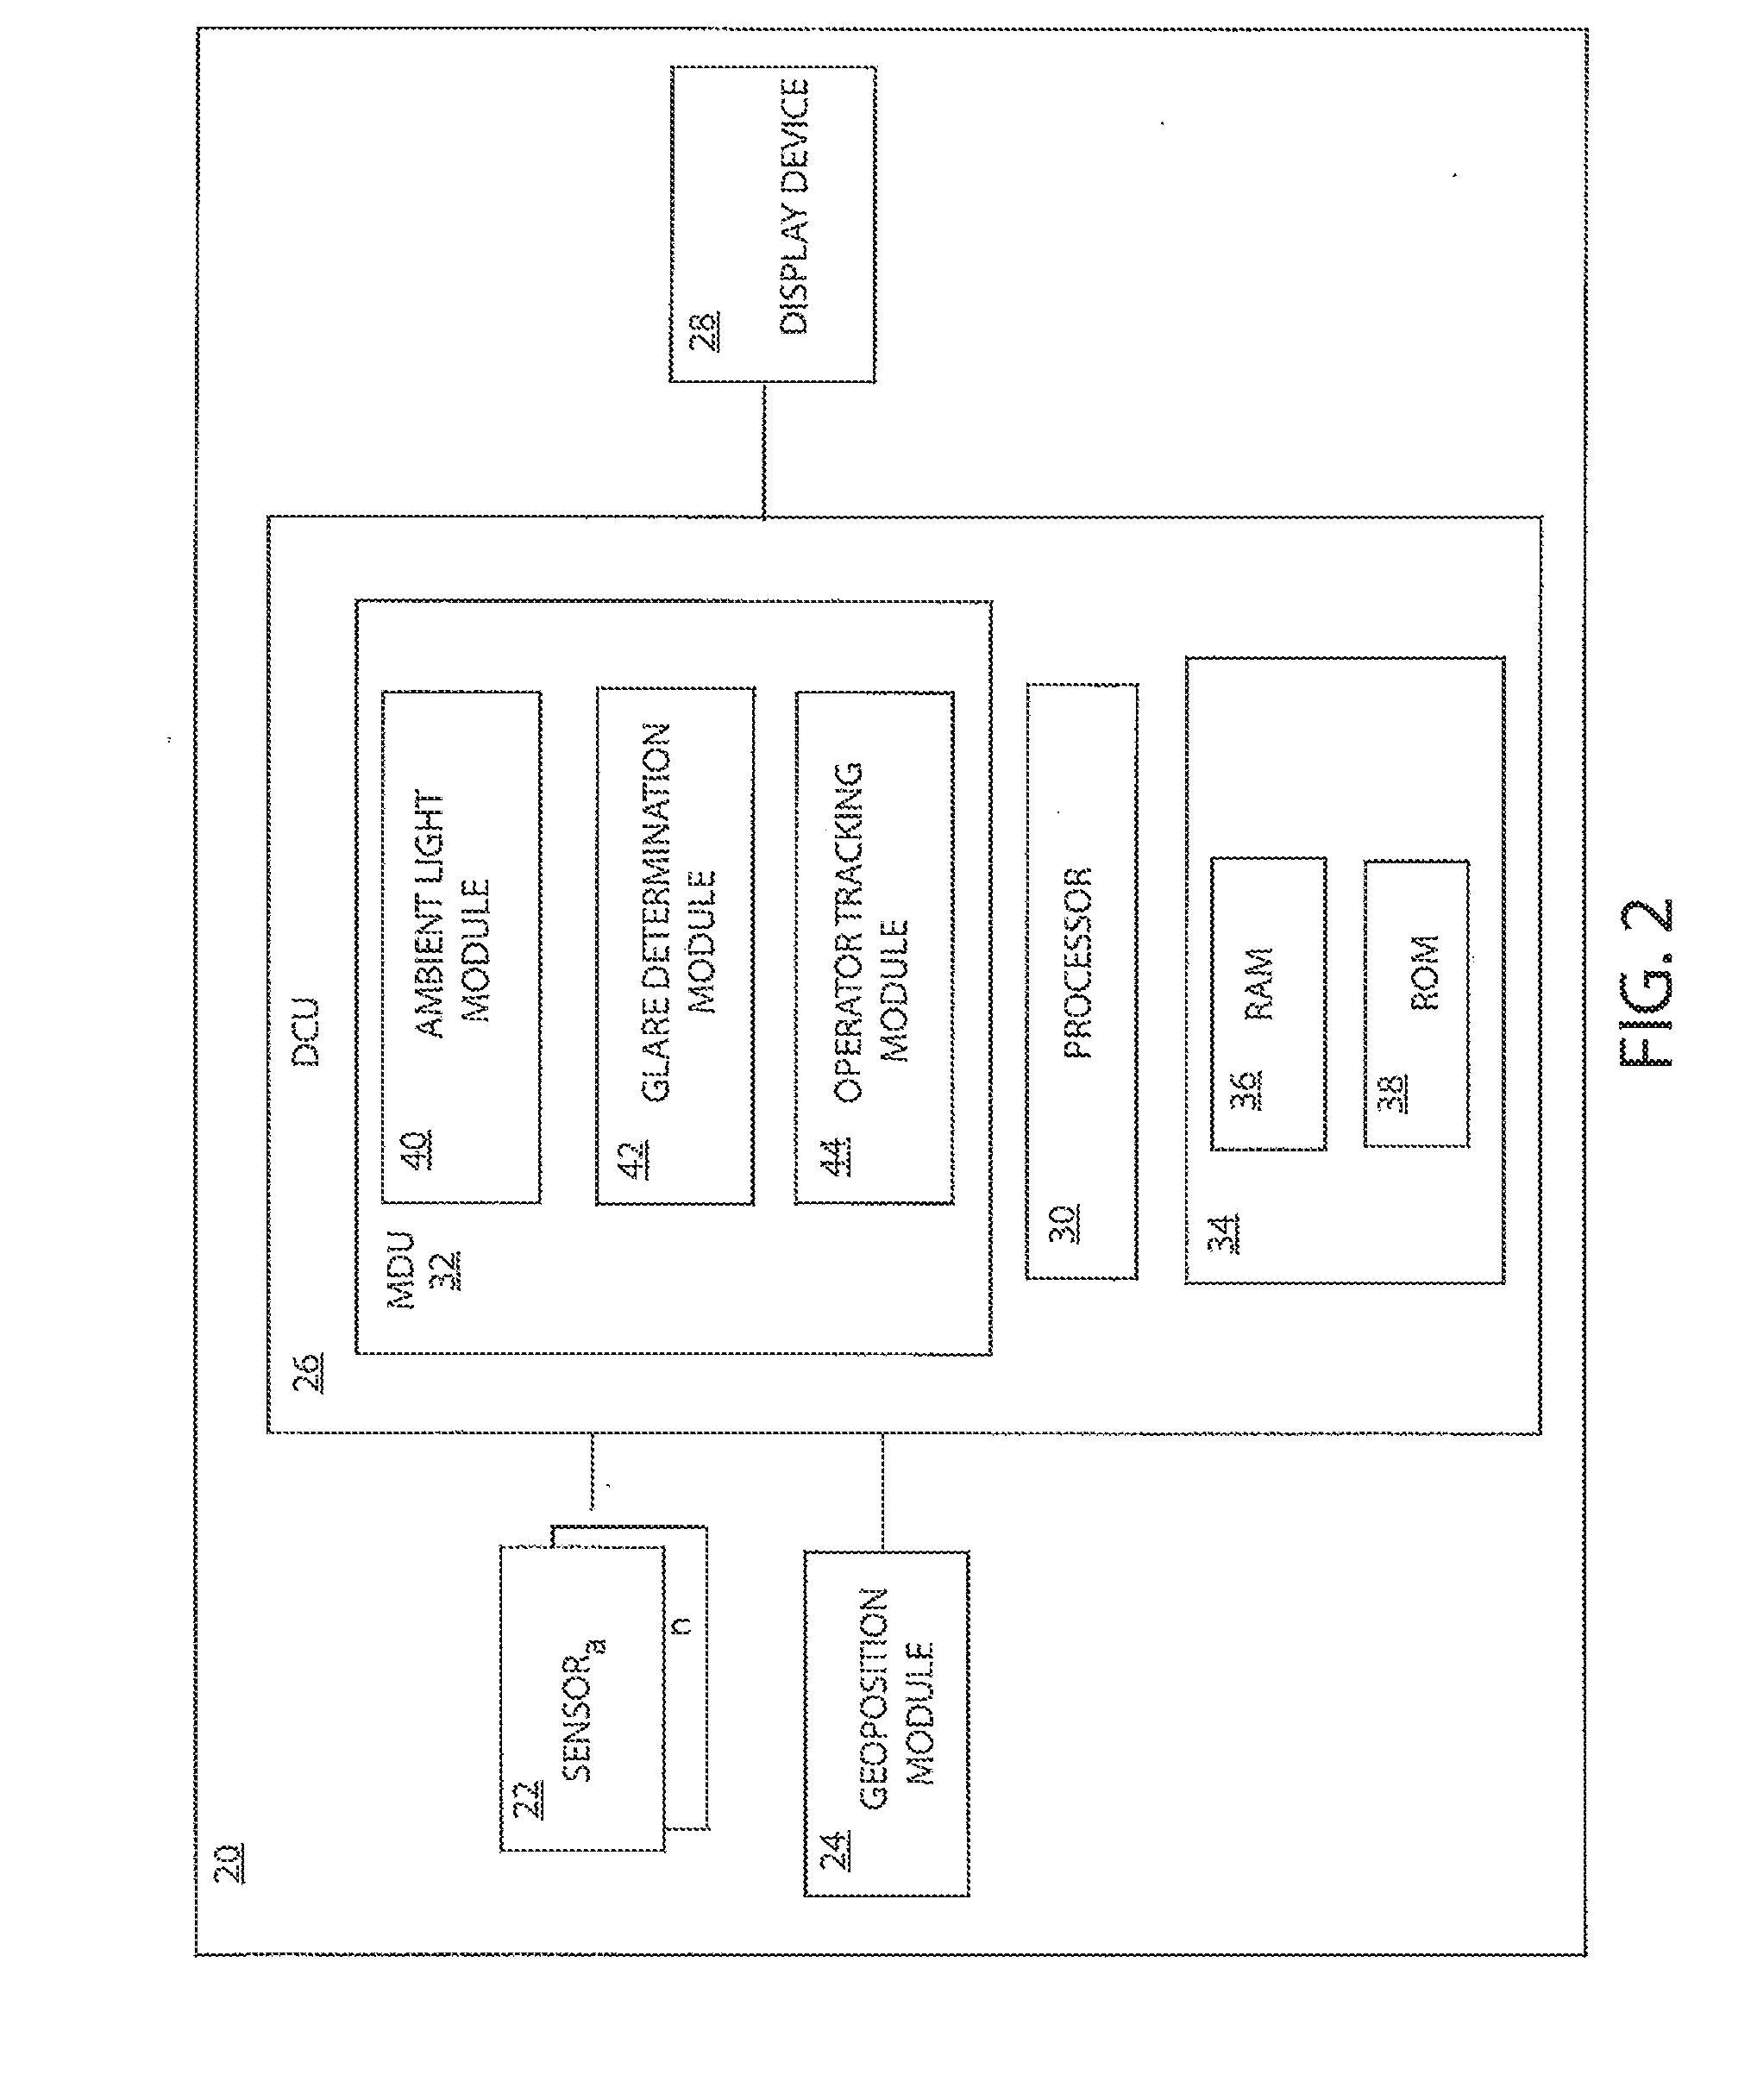 Method and apparatus for improving user interface visibility in agricultural machines